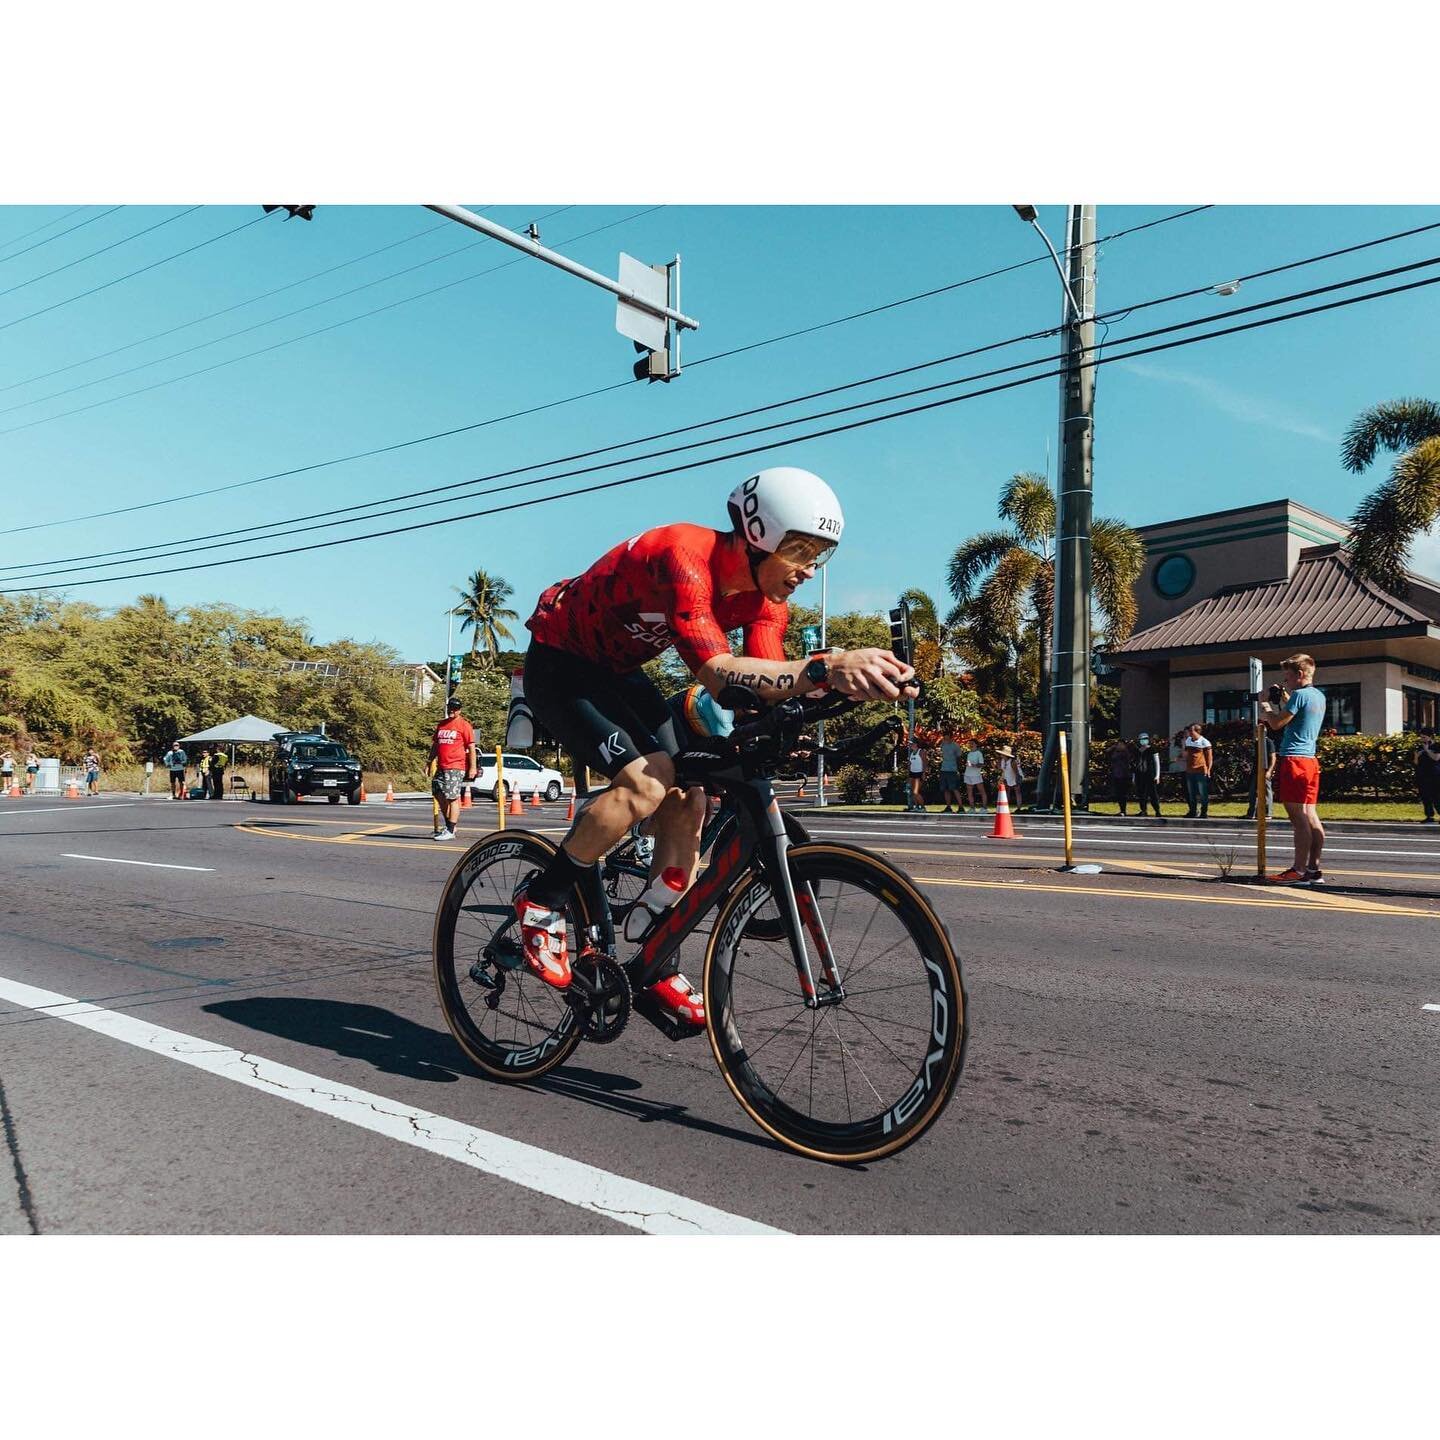 Not broken any more, @brockjosh93 crushed his first time to the Ironman World Championships. 

Swim - 1:02
Bike - 5:29
Run - 3:57
Overall - 10:43

Coaching @brockjosh93 over the past two years to achieve this goal of his has been a journey. 

Josh is